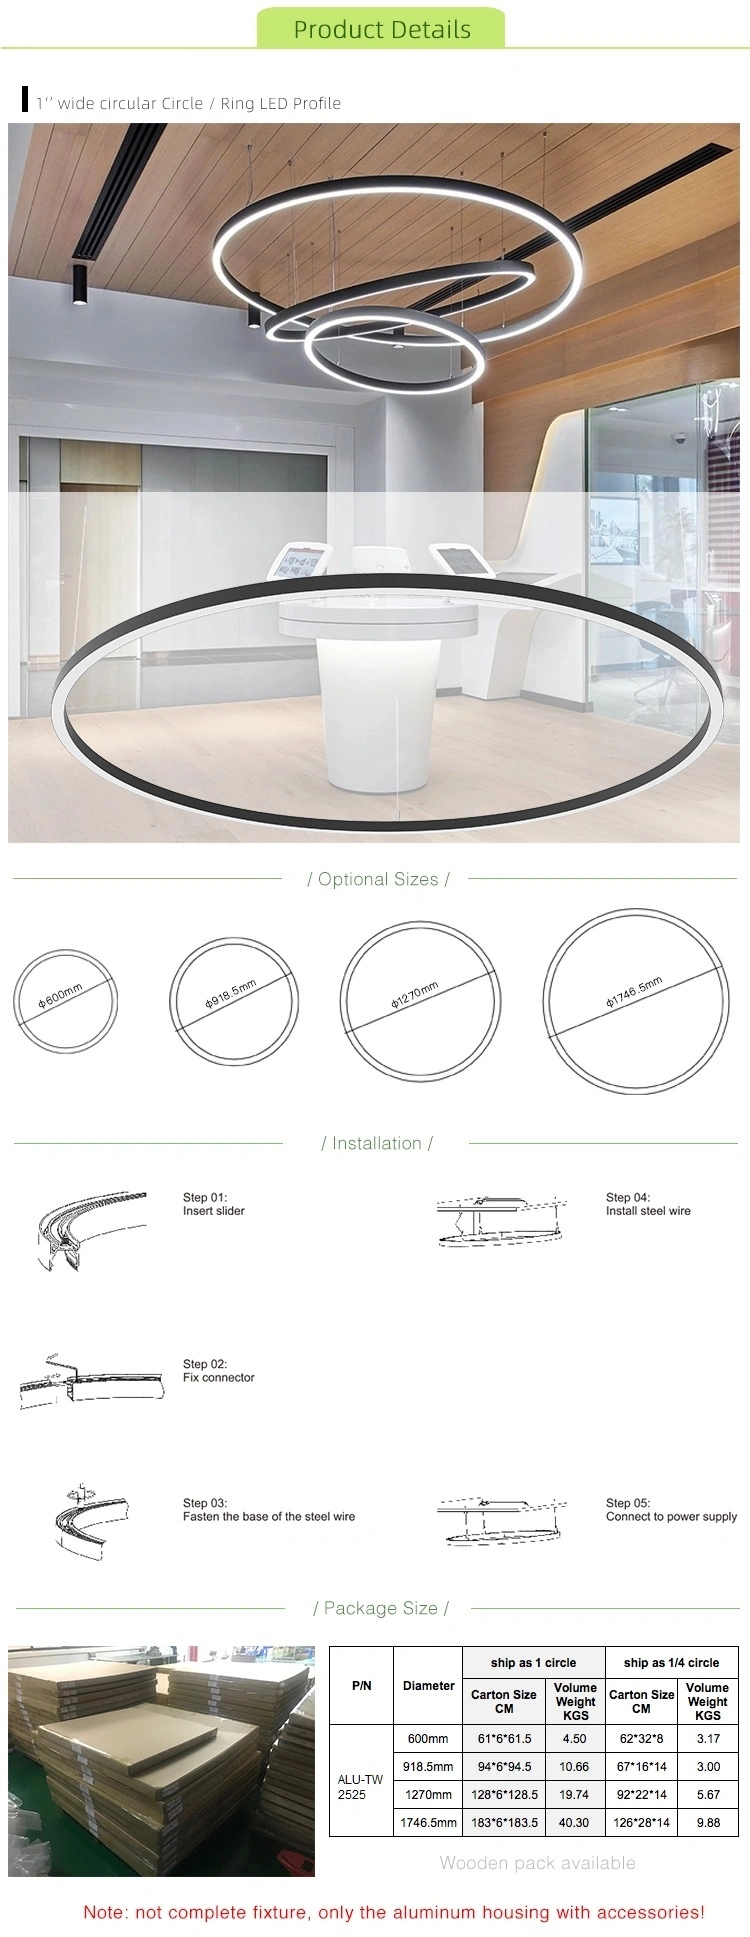 Od600 Circular LED Profile, Suitable for Office Decoration